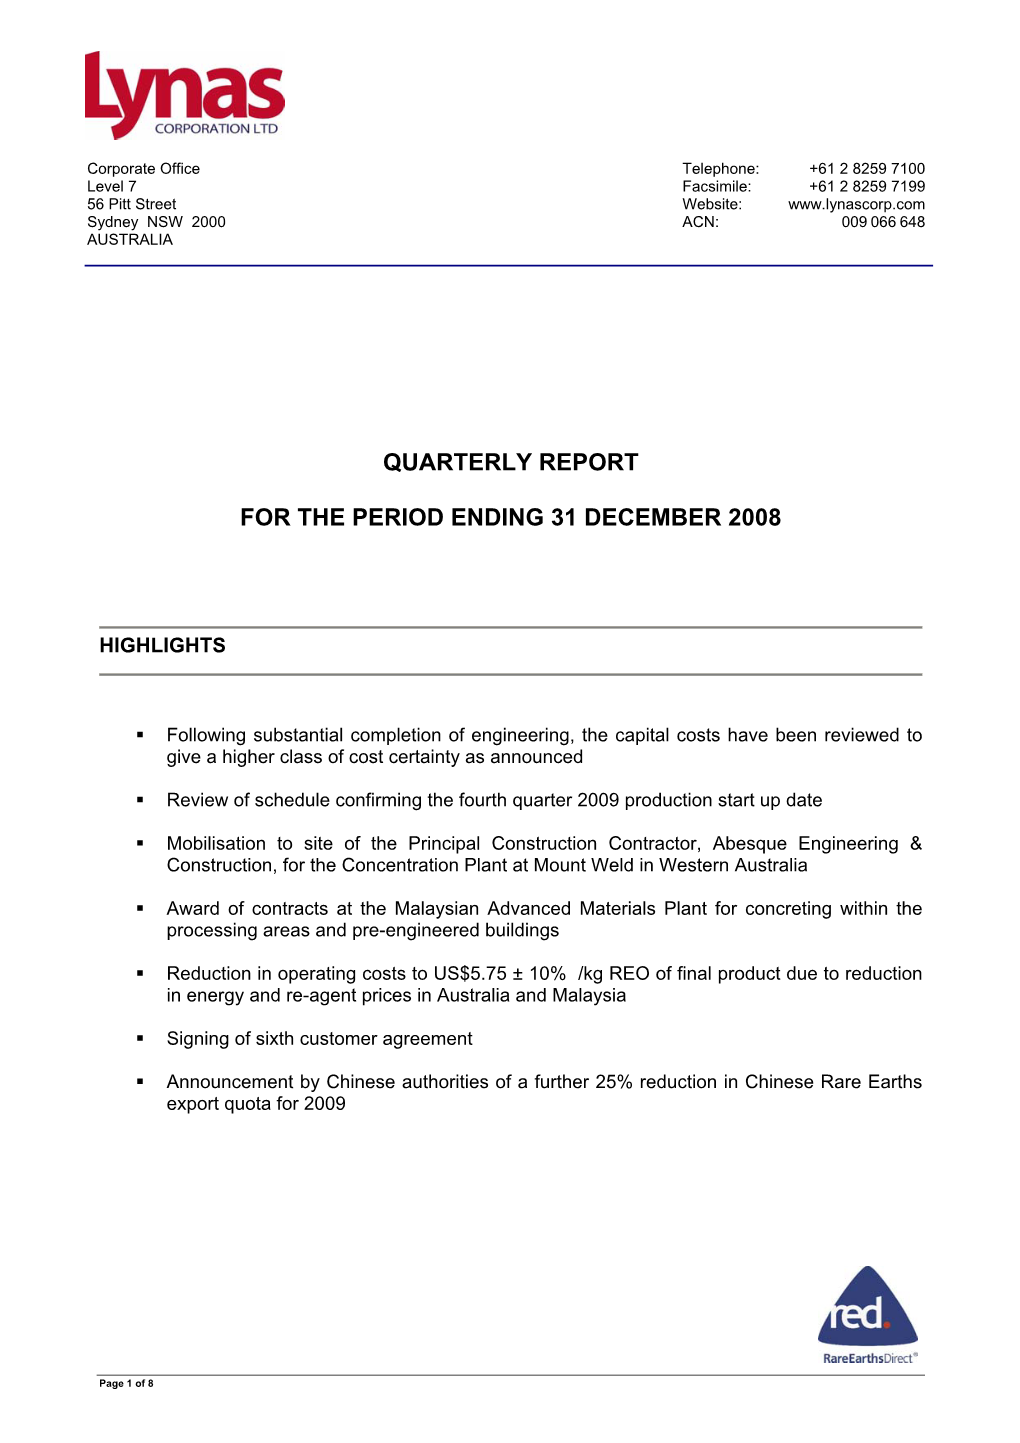 Quarterly Report for the Period Ending 31 December 2008